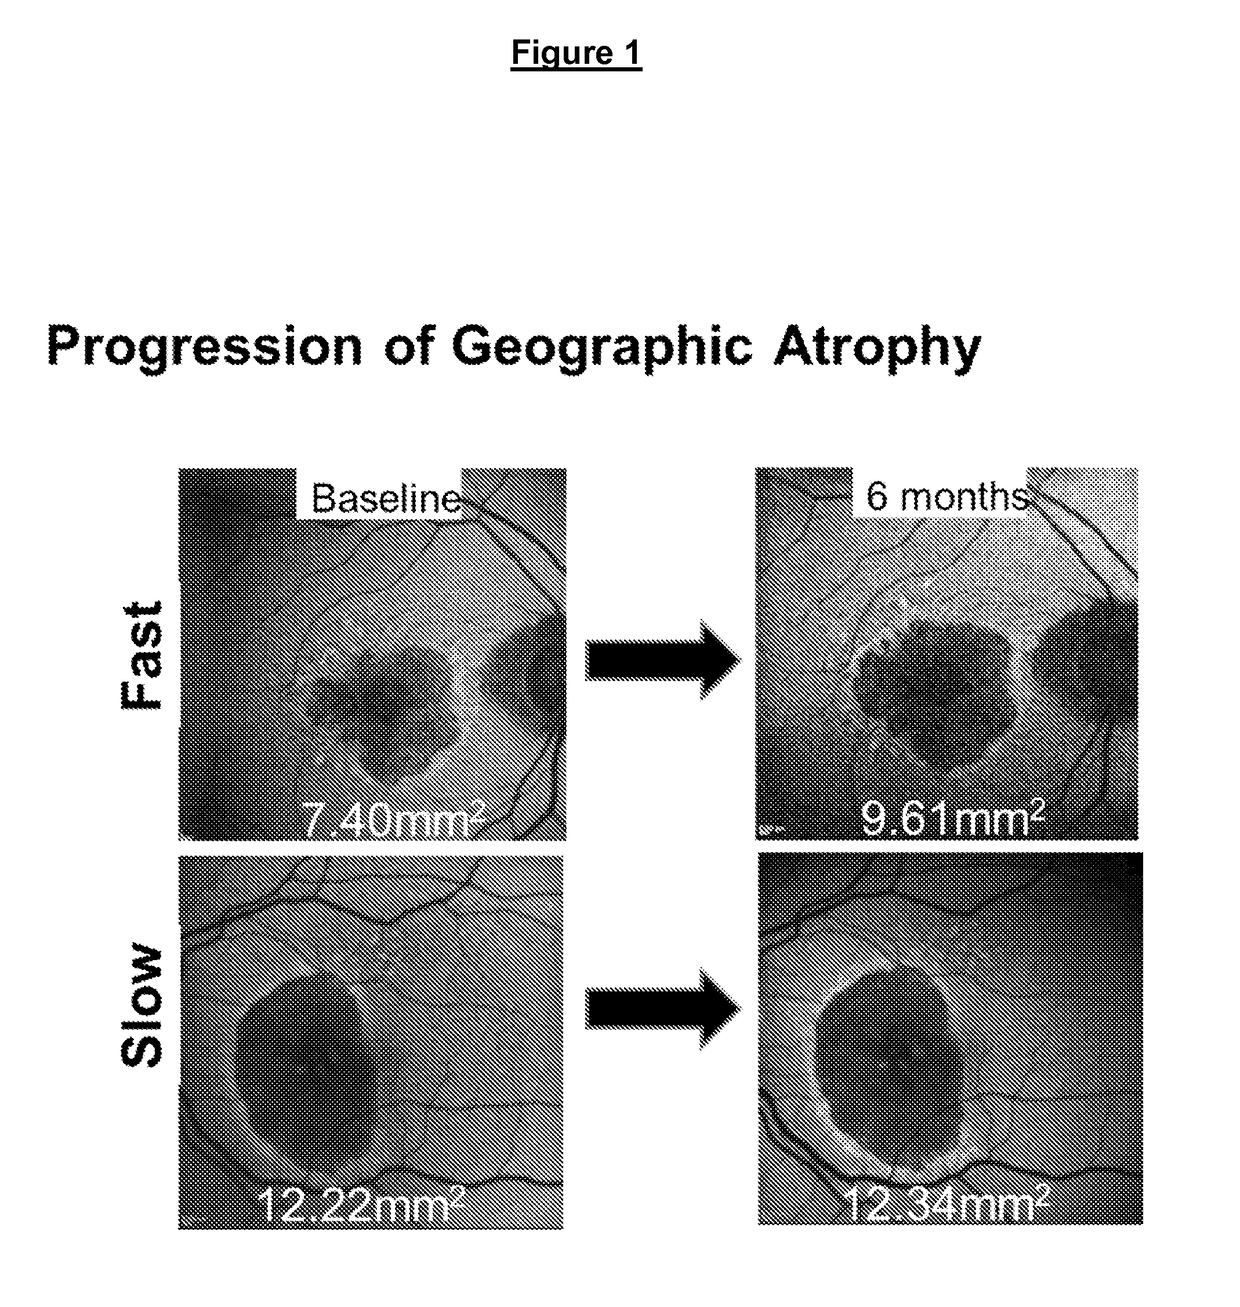 Impact of genetic factors on disease progression and response to Anti-c5 antibody in geographic atrophy